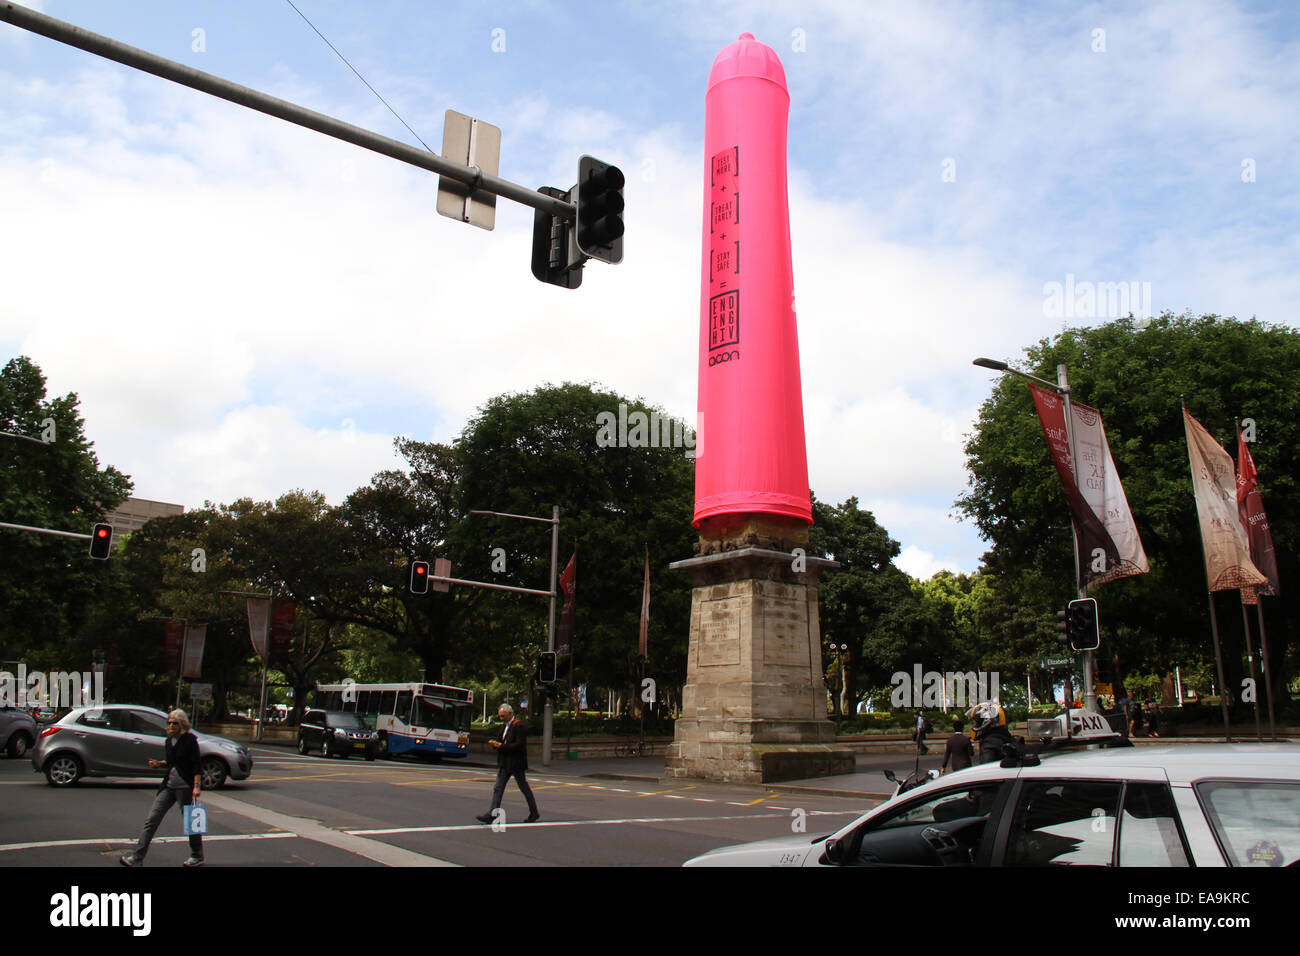 Hyde Park South, Cnr Bathurst Street and Elizabeth Street, Sydney, NSW, Australia. 10th Nov, 2014.  An 18-metre high giant pink condom has been inserted onto the Obelisk at Hyde Park in Sydney to raise awareness of HIV issues. It is an initiative of the AIDS Council of NSW (ACON) in the lead up to World AIDS Day on 1 December. Copyright Credit:  2014 Richard Milnes/Alamy Live News. Stock Photo